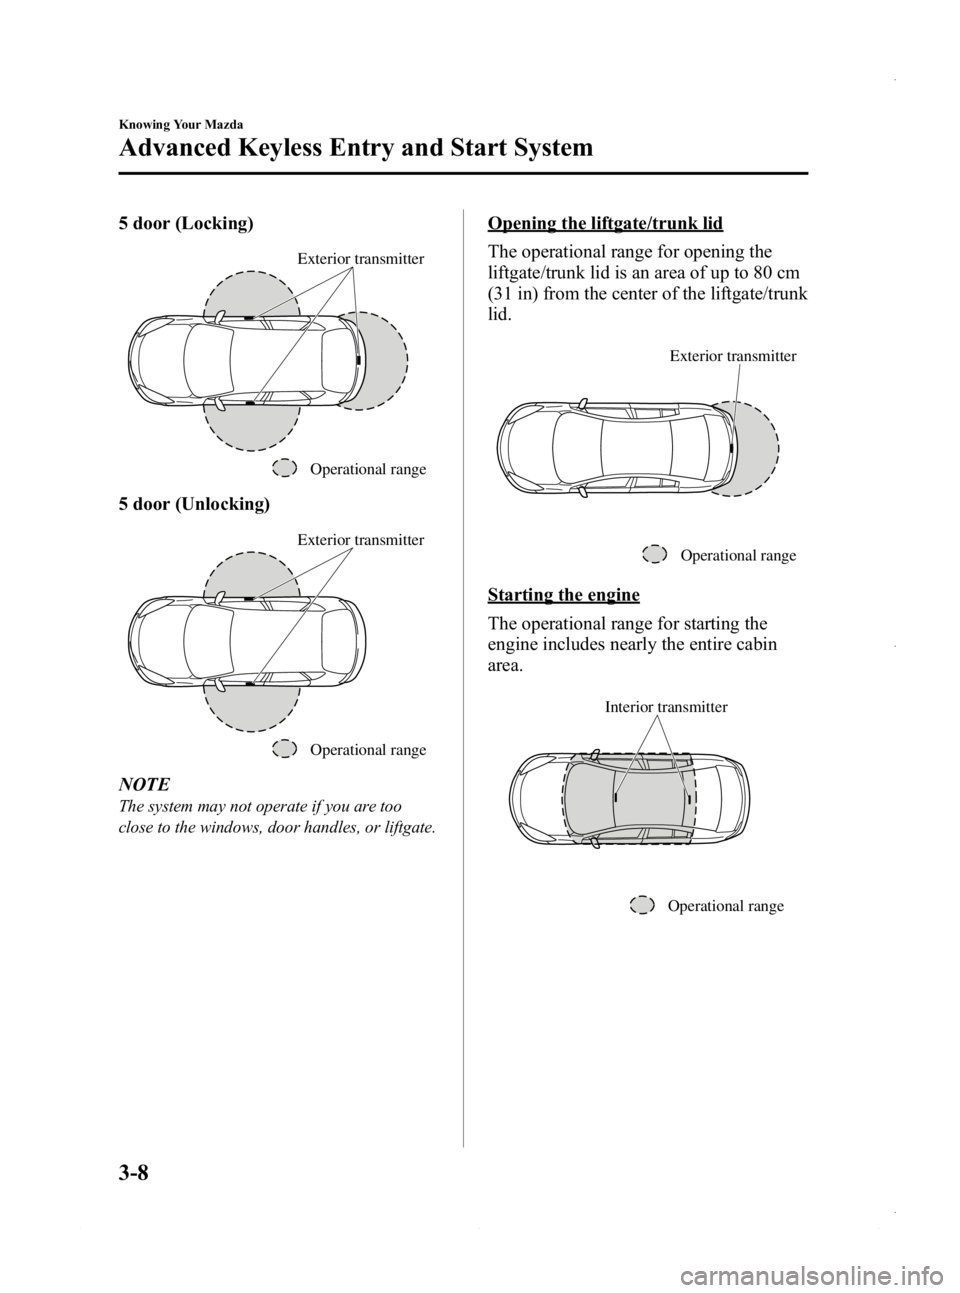 MAZDA MODEL 3 5-DOOR 2013  Owners Manual Black plate (86,1)
5 door (Locking)
Operational range
Exterior transmitter
5 door (Unlocking)
Operational range
Exterior transmitter
NOTE
The system may not operate if you are too
close to the windows